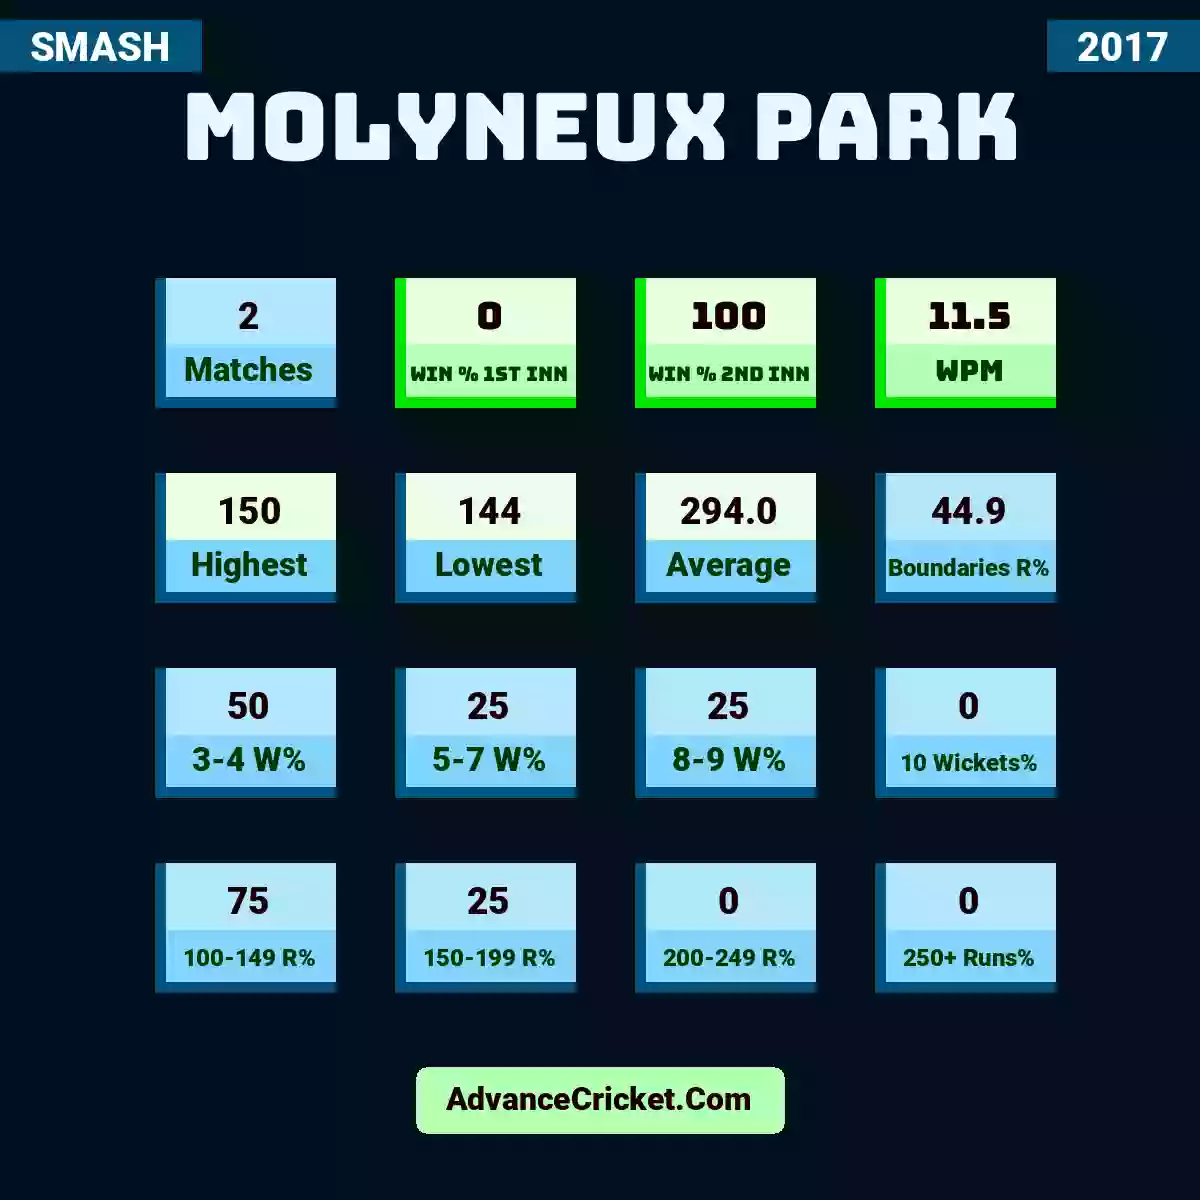 Image showing Molyneux Park with Matches: 2, Win % 1st Inn: 0, Win % 2nd Inn: 100, WPM: 11.5, Highest: 150, Lowest: 144, Average: 294.0, Boundaries R%: 44.9, 3-4 W%: 50, 5-7 W%: 25, 8-9 W%: 25, 10 Wickets%: 0, 100-149 R%: 75, 150-199 R%: 25, 200-249 R%: 0, 250+ Runs%: 0.